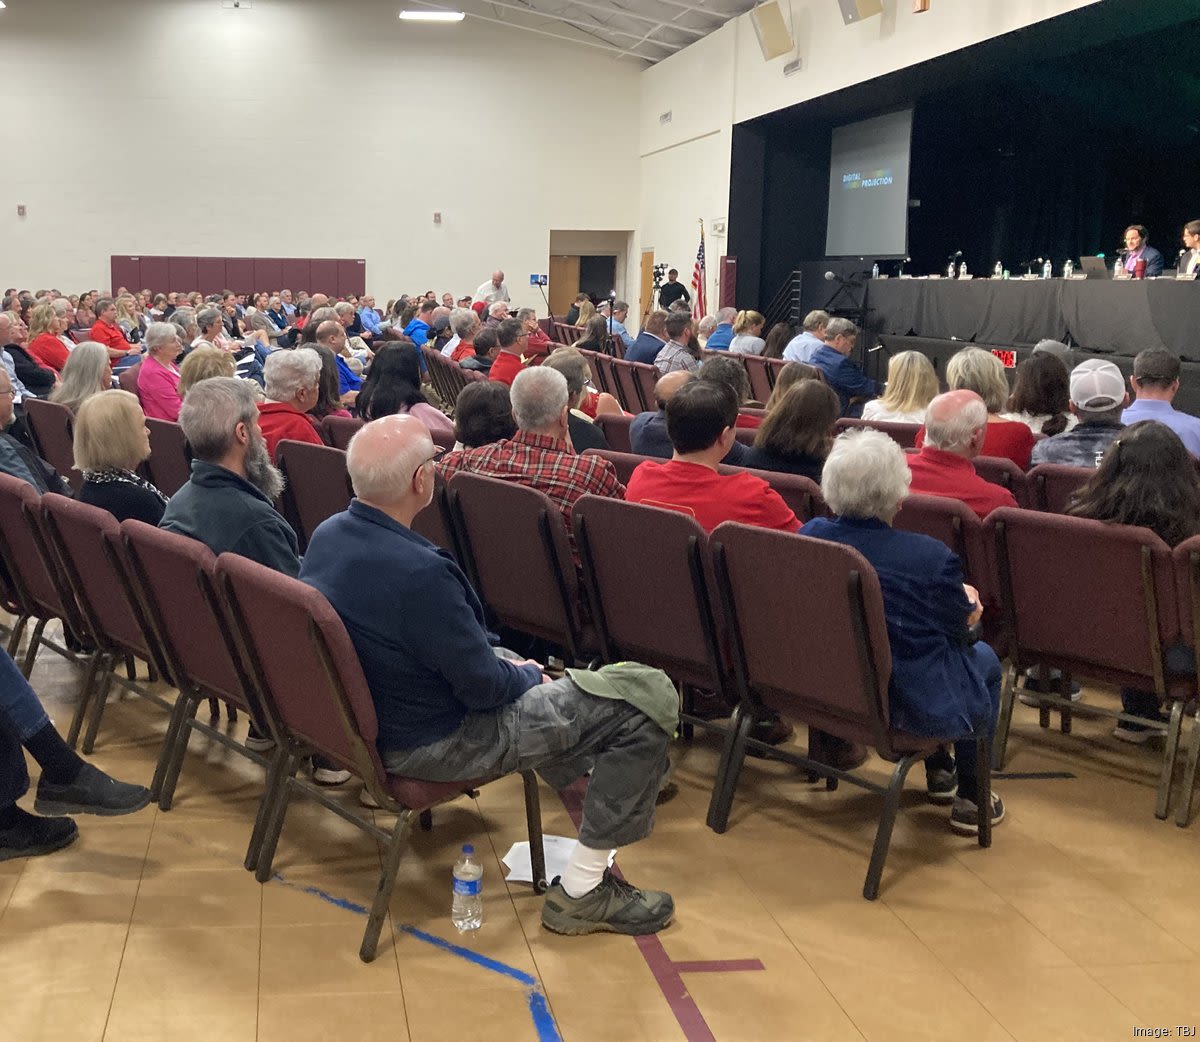 Entire staff of the Town of Summerfield resigns in protest of "unfair treatment" of town's manager, staff and elected officials - Triad Business Journal